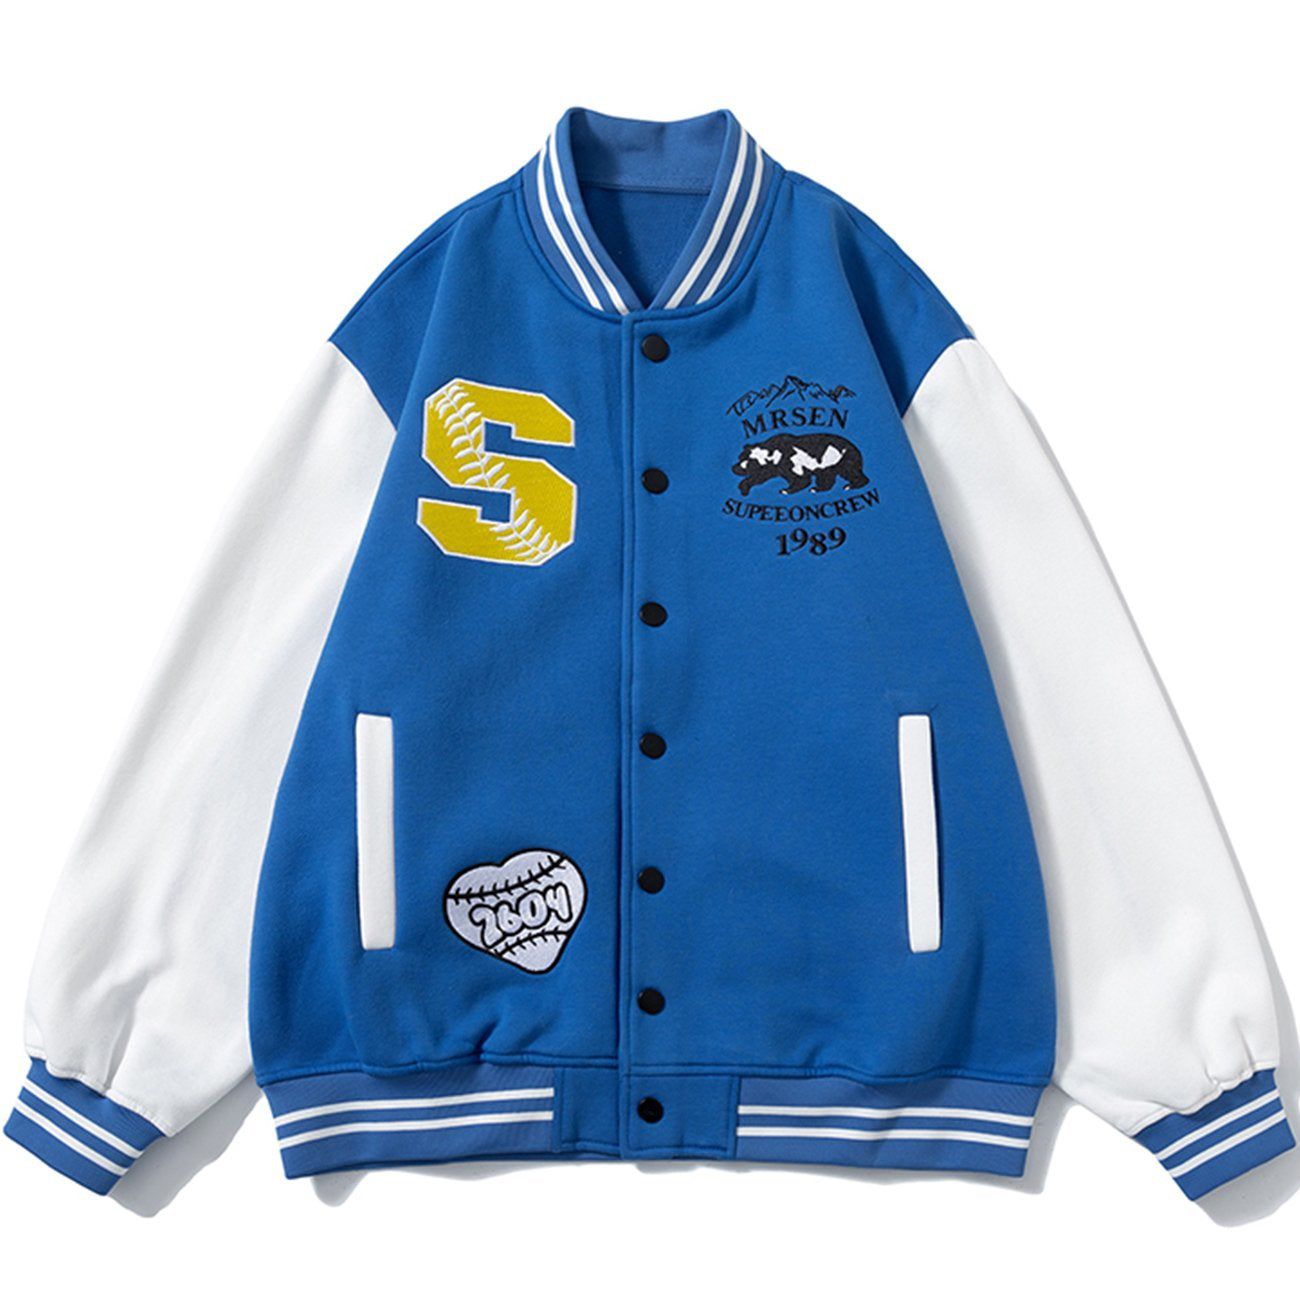 LUXENFY™ - Embroidery Letter Varsity Jacket - 165 luxenfy.com